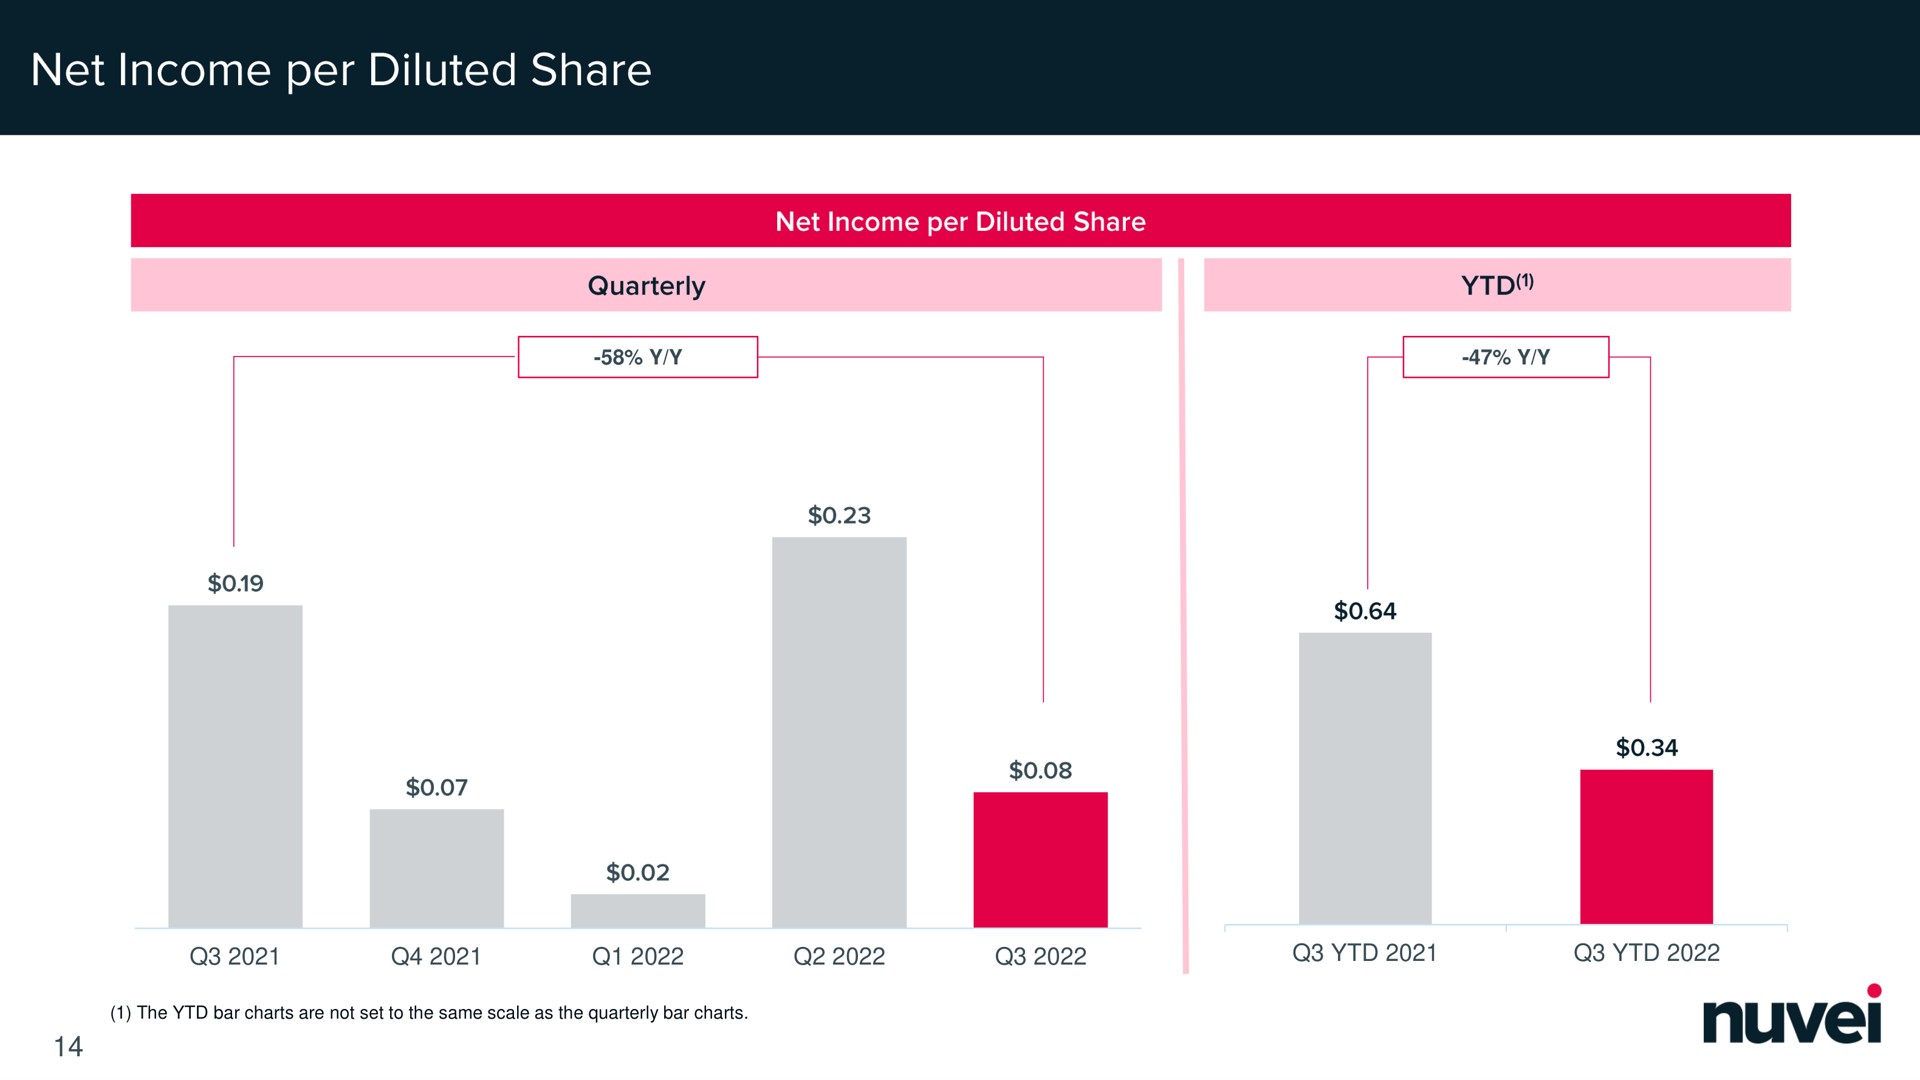 net income per diluted share | Nuvei